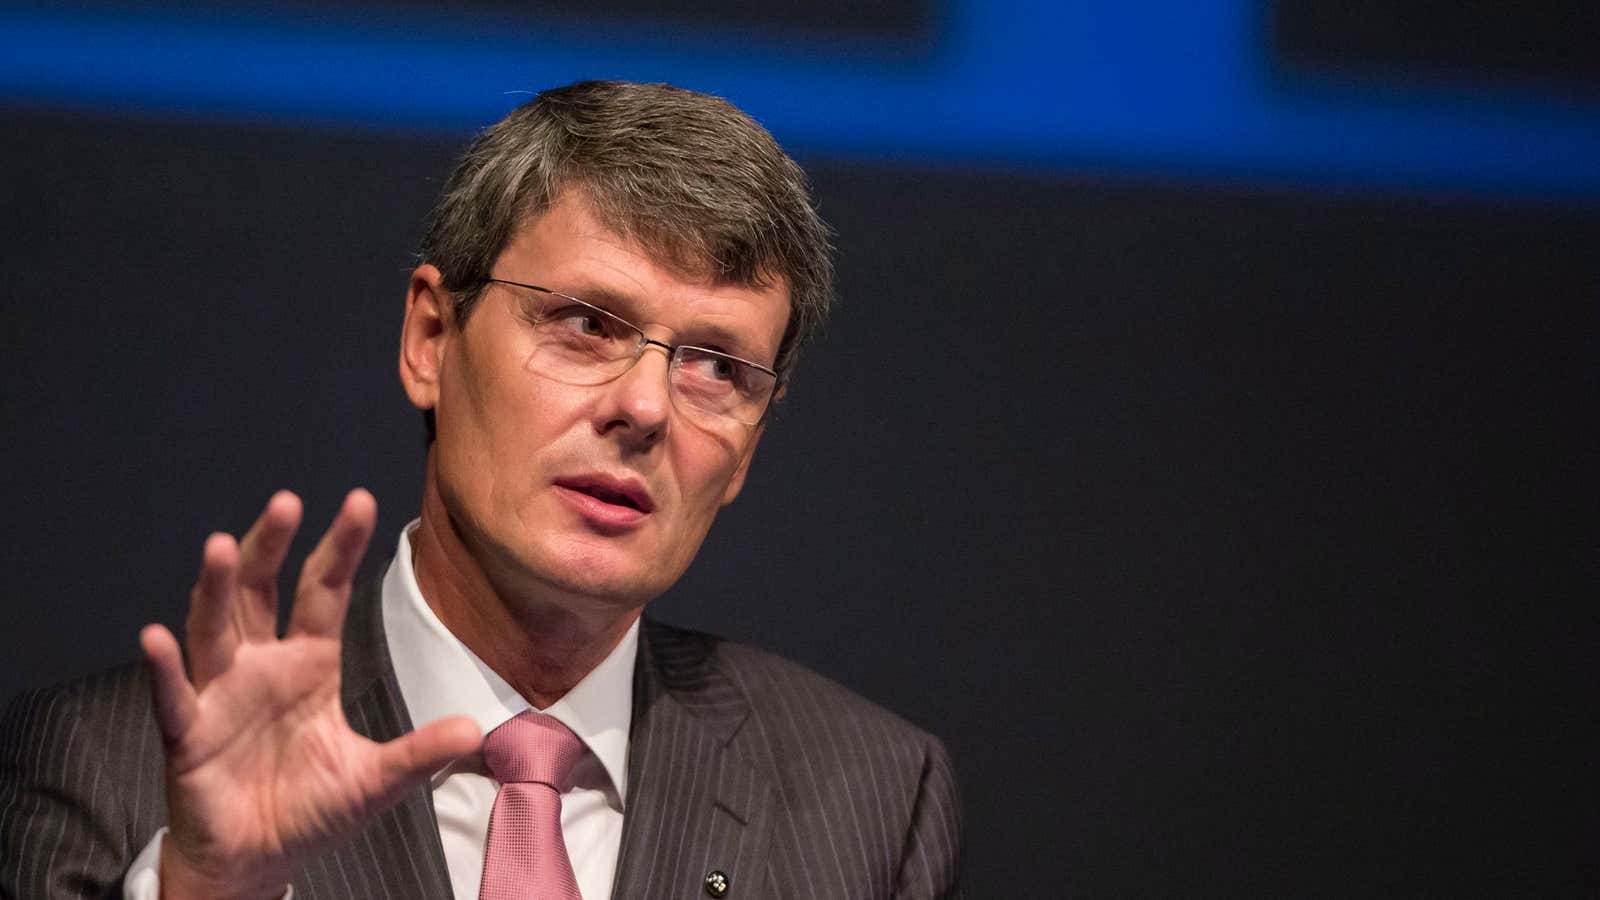 Blackberry CEO Thorsten Heins just ran out of time.